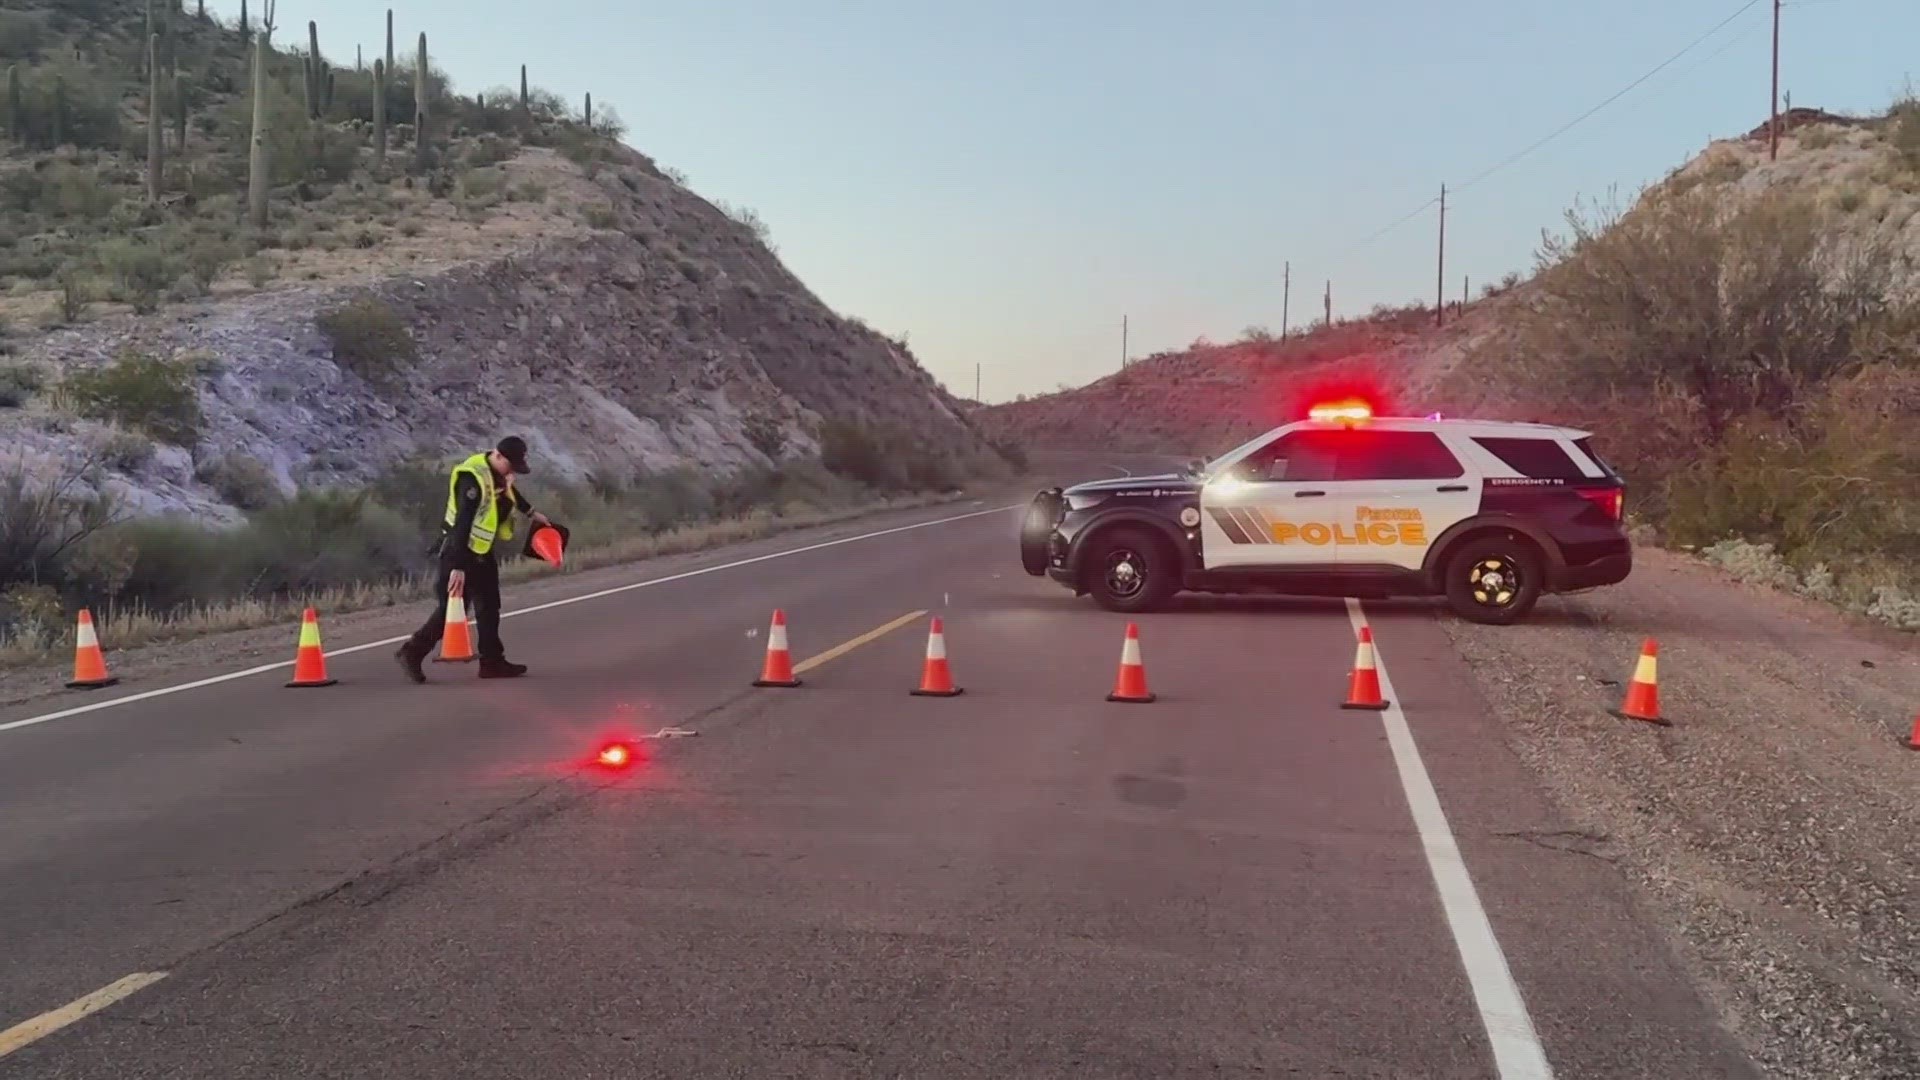 The crash happened just north of the intersection of State Route 74 and Castle Hot Springs Road near Lake Pleasant on Saturday.